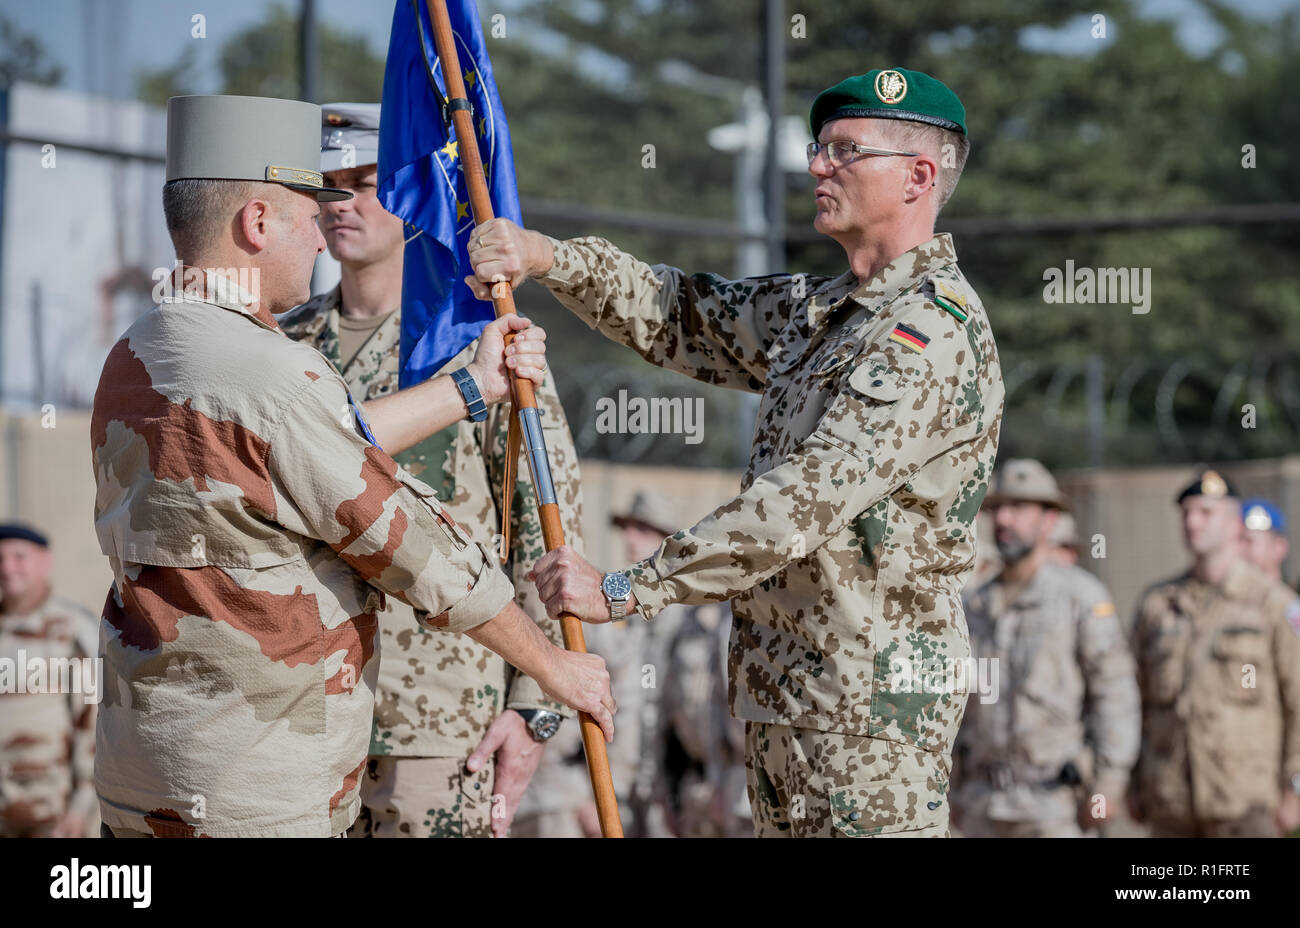 Bamako, Mali. 12th Nov, 2018. Peter Mirow, Bundeswehr General, receives the troop flag of the EU training mission EUTM MLI from the French General Daniel Grammatico. Germany has taken over the leadership of the mission in Mali. Von der Leyen is in Africa for a three-day visit and also visits the soldiers of the Bundeswehr. Credit: Michael Kappeler/dpa/Alamy Live News Stock Photo